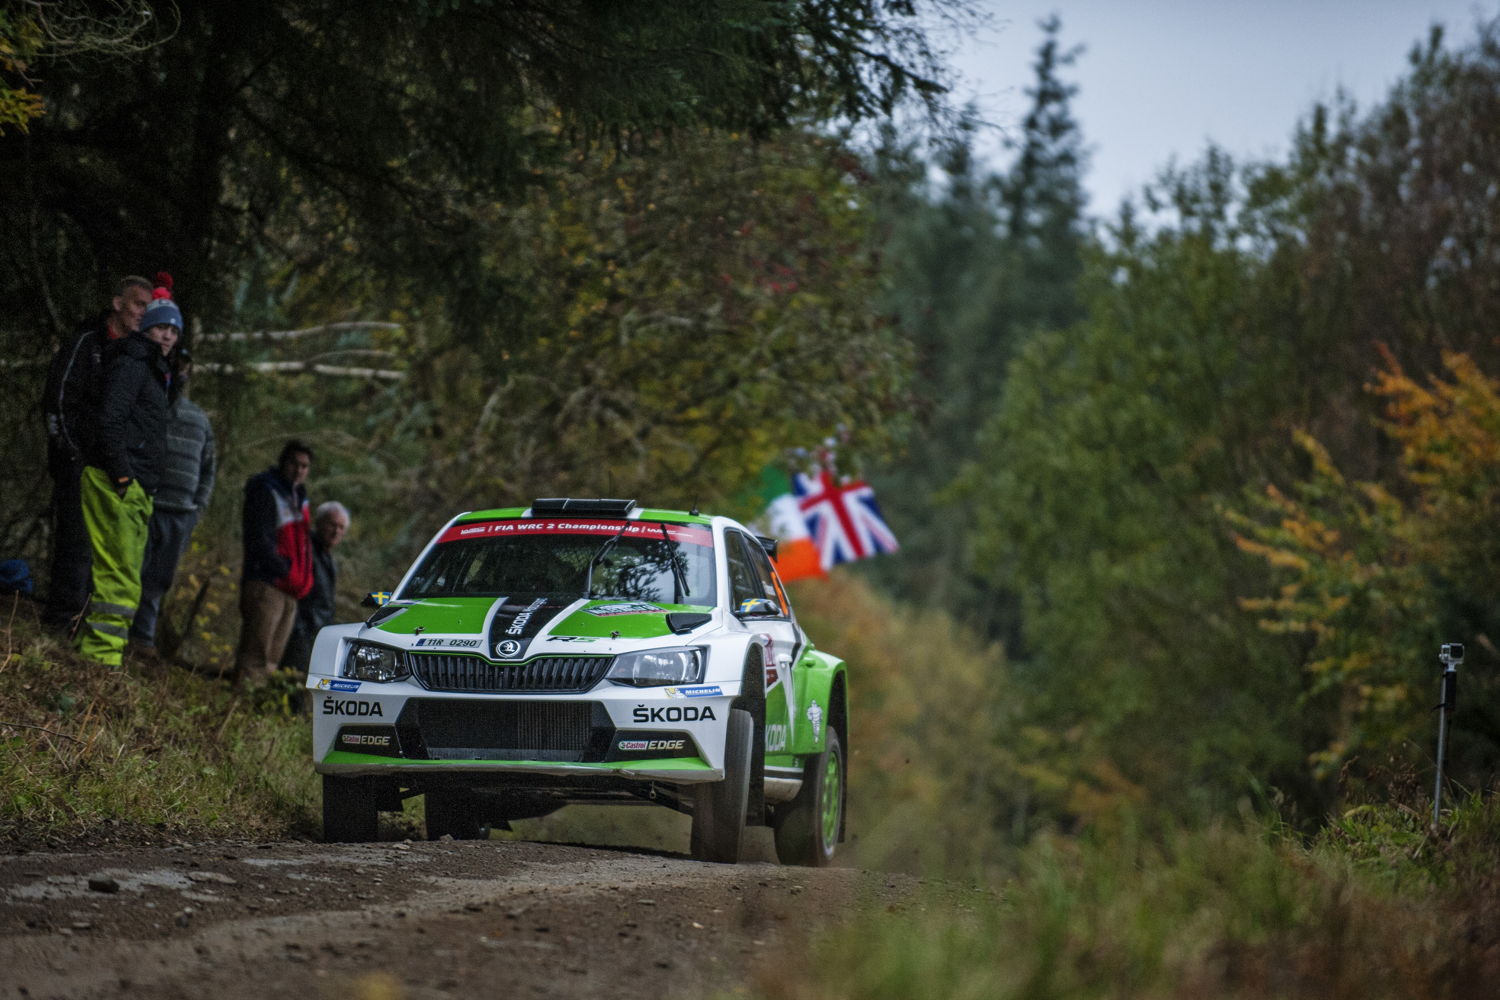 The Swedish pairing Pontus Tidemand/Jonas Andersson is the second ŠKODA works duo in the top five of the WRC 2 standings. At the end of the first day’s rallying in Wales, the two ŠKODA drivers are in third place overall.